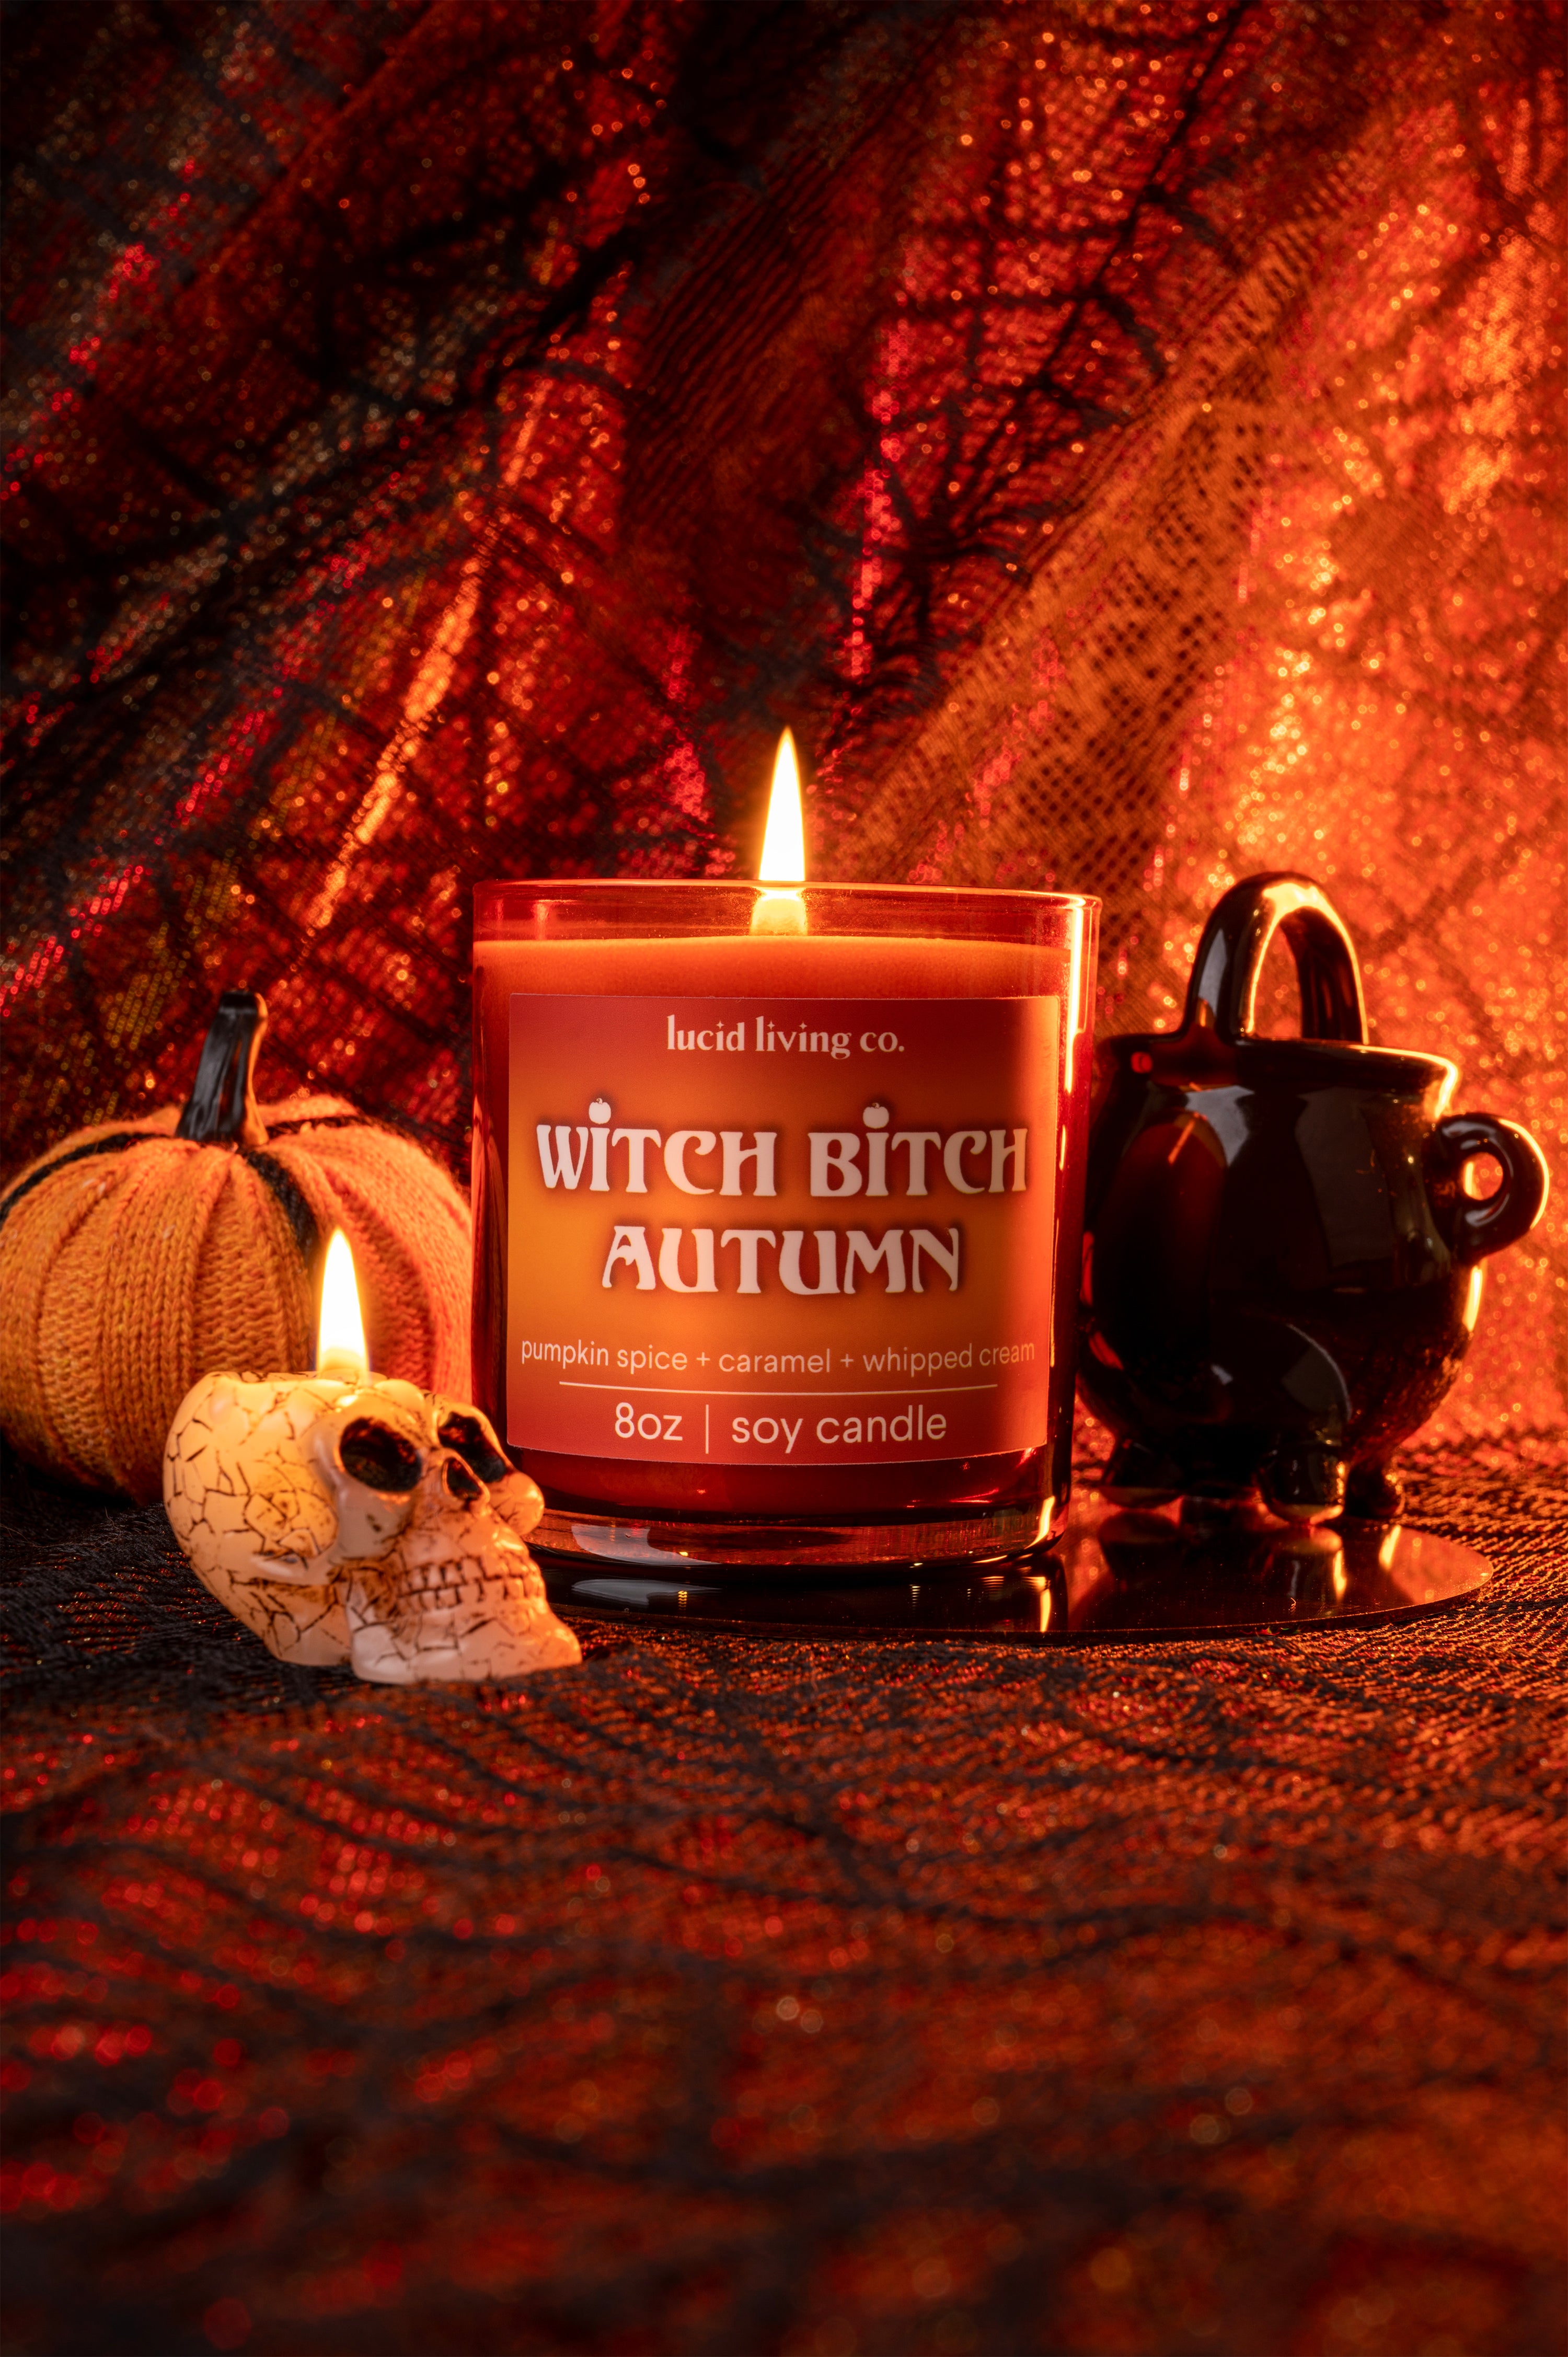 Witch Bitch Autumn Soy Candle